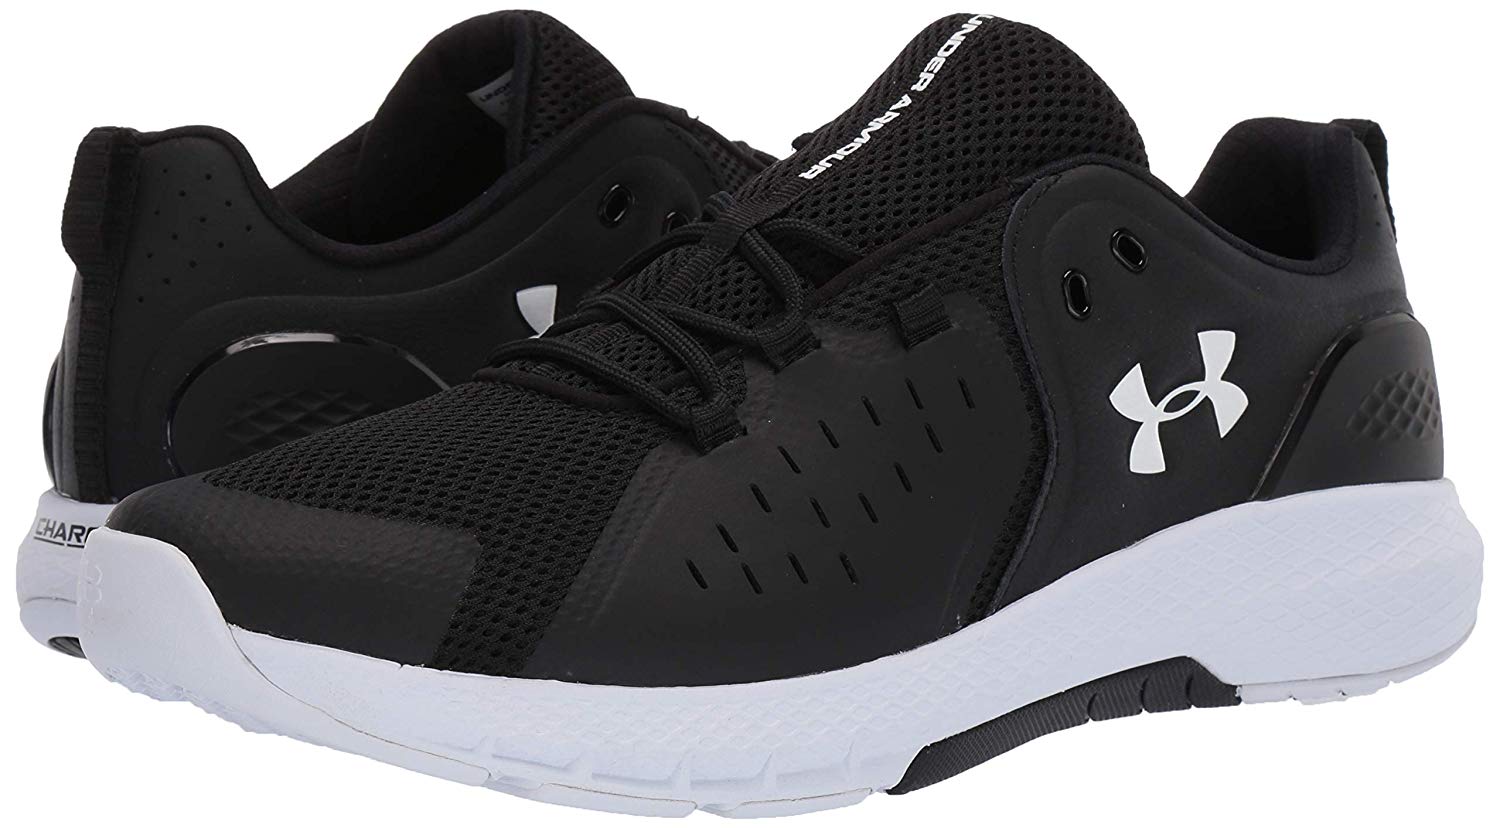 Under Armour Men's Charged Commit 2.0 Running Shoe, Black/White, Size ...